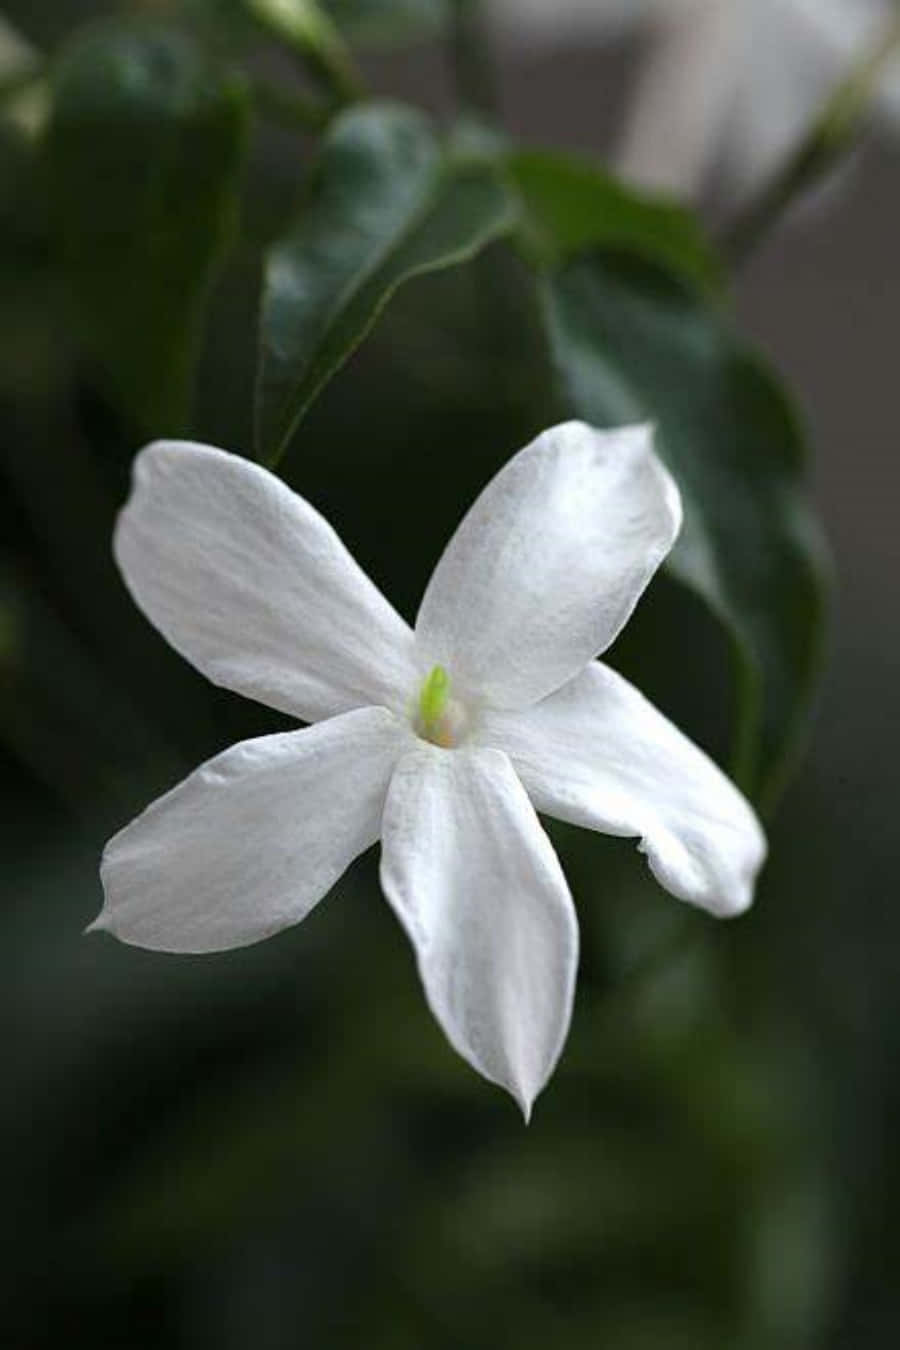 A White Flower With Green Leaves On It